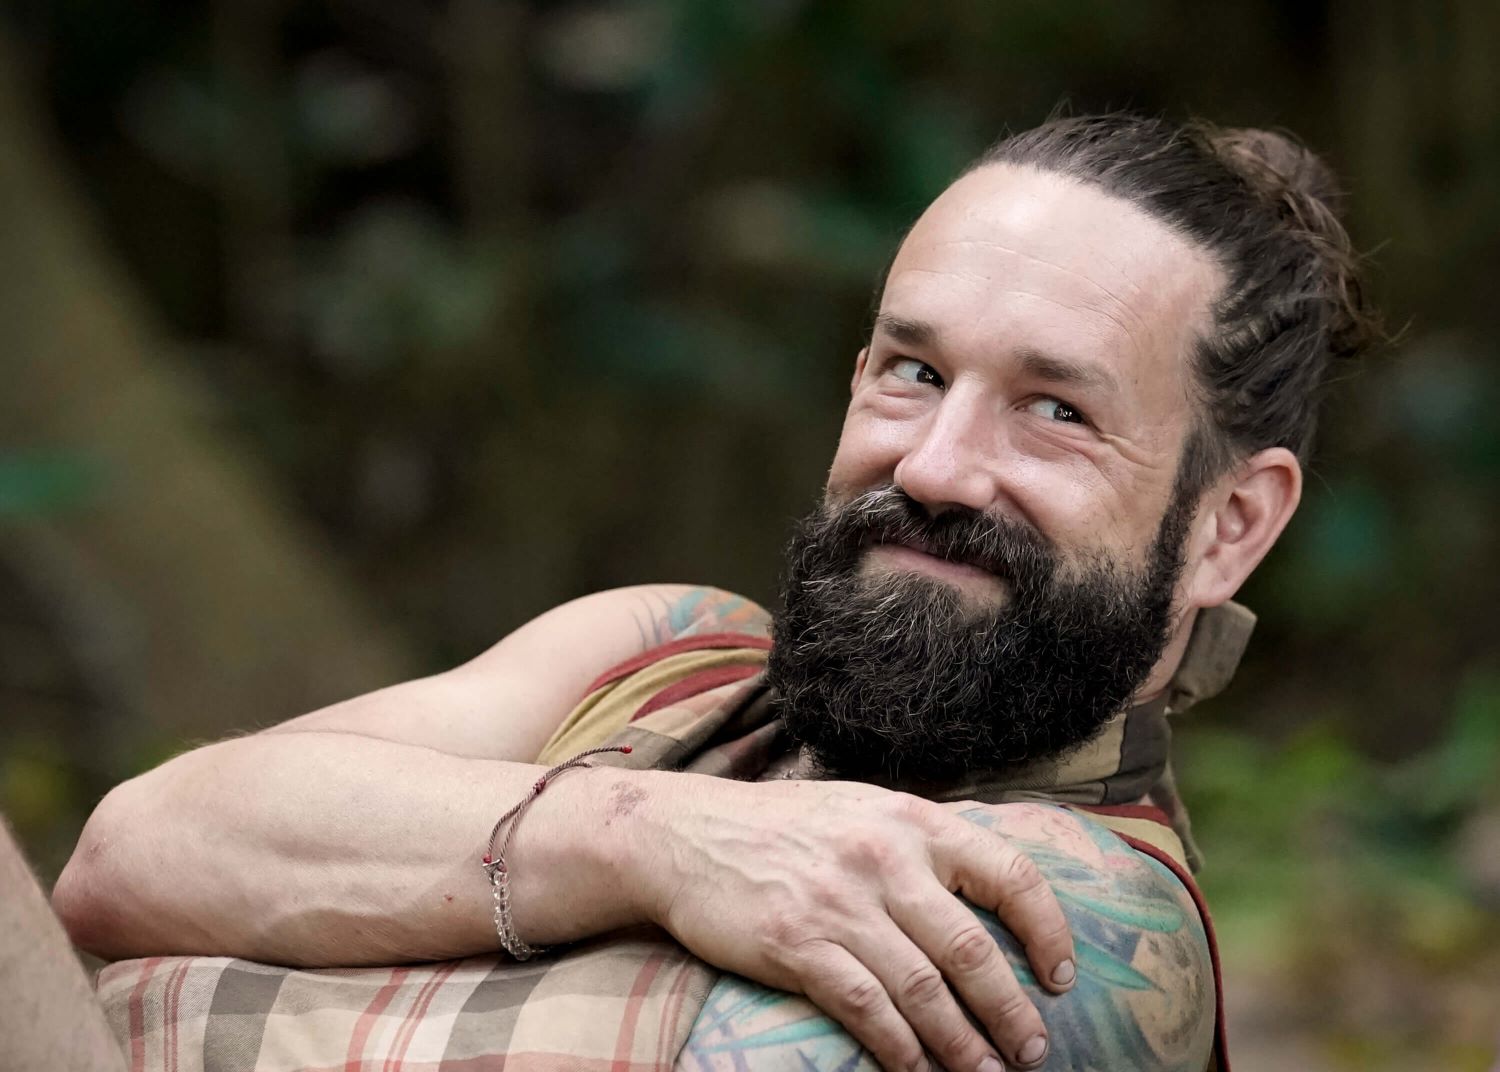 Matthew Grinstead-Mayle, a castaway on 'Survivor 44,' wears a light yellow and red tank top and a orange and brown plaid sling for his arm. According to 'Survivor 44' spoilers, Matthew might be medically evacuated from the game due to his shoulder injury.